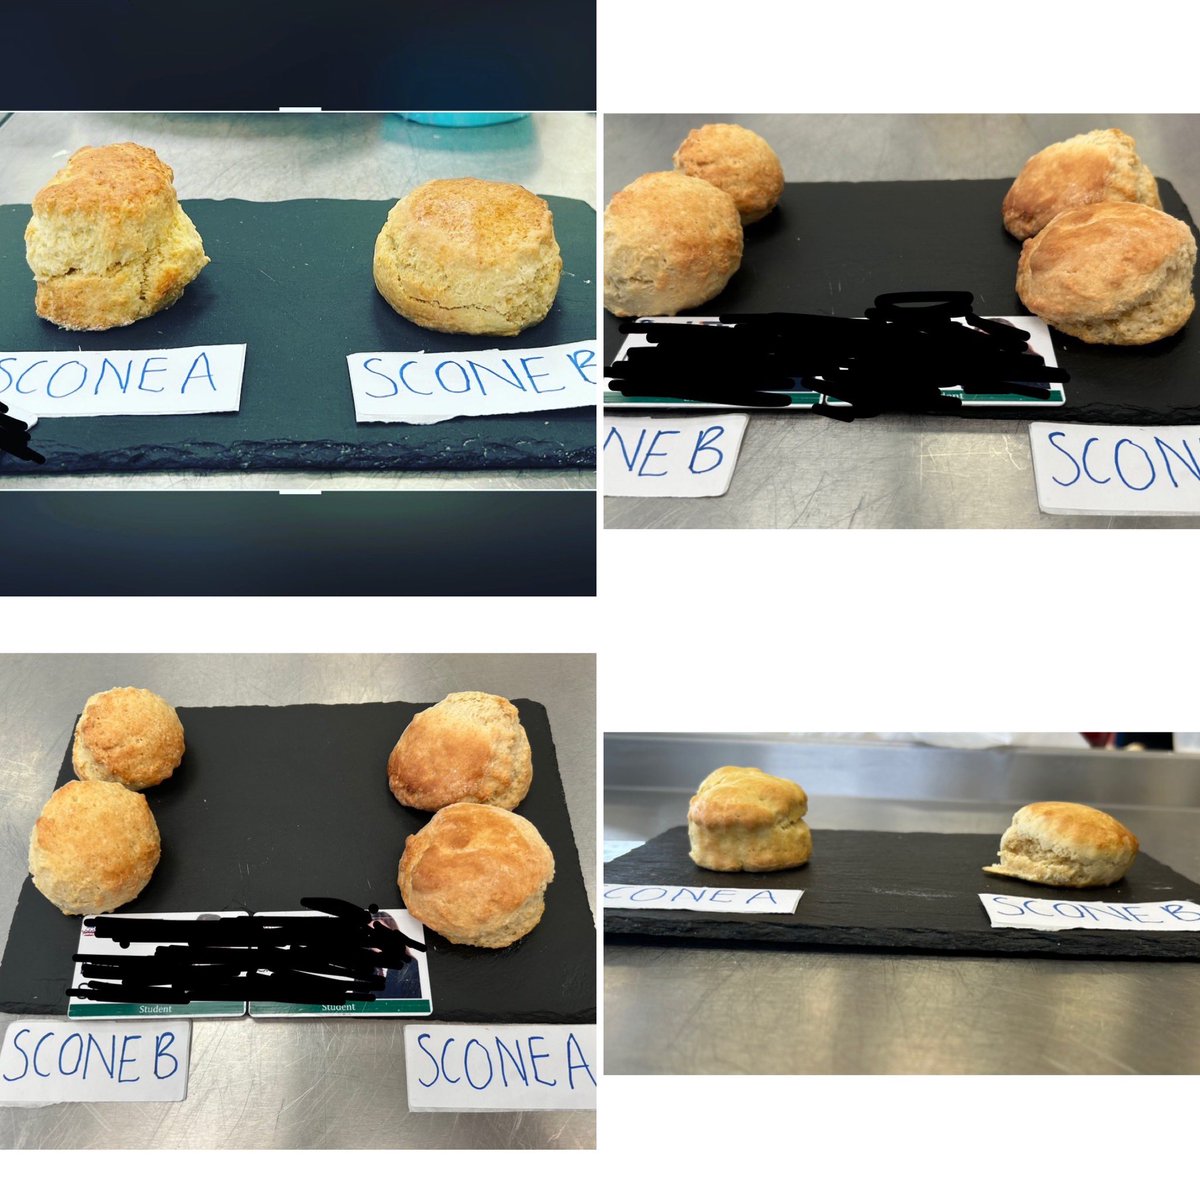 It’s all about food science!! Mock work from students exploring the working properties and functions in scones - experiment 1 - raising agents - alkaline and acid pHs - chemical, biological and mechanical raising agents #food #dtchat #teachfood #dandt